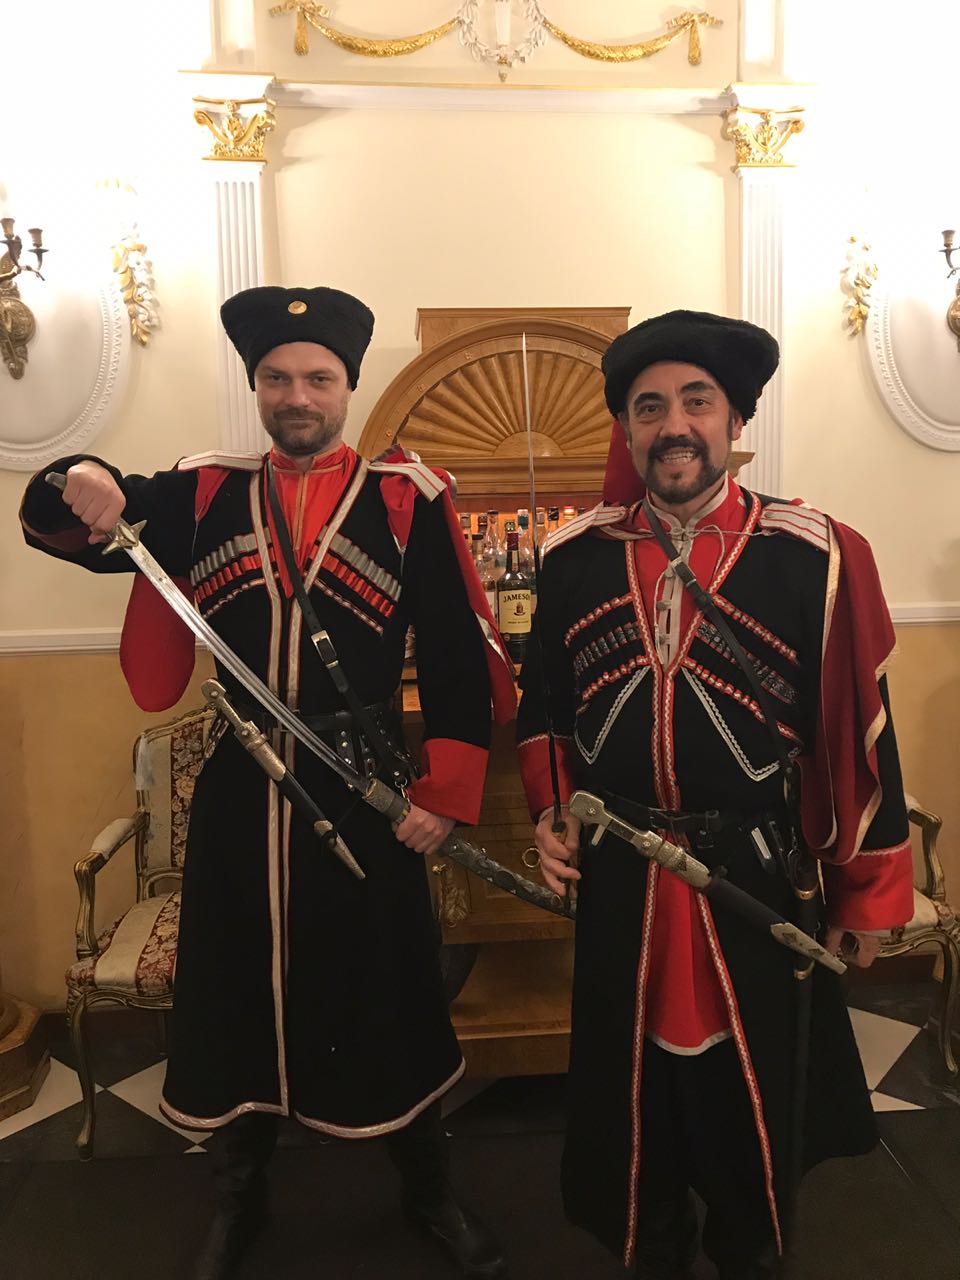 Bank-of-singapore-st-petersburg-client-appreciation-russian-sword-experience